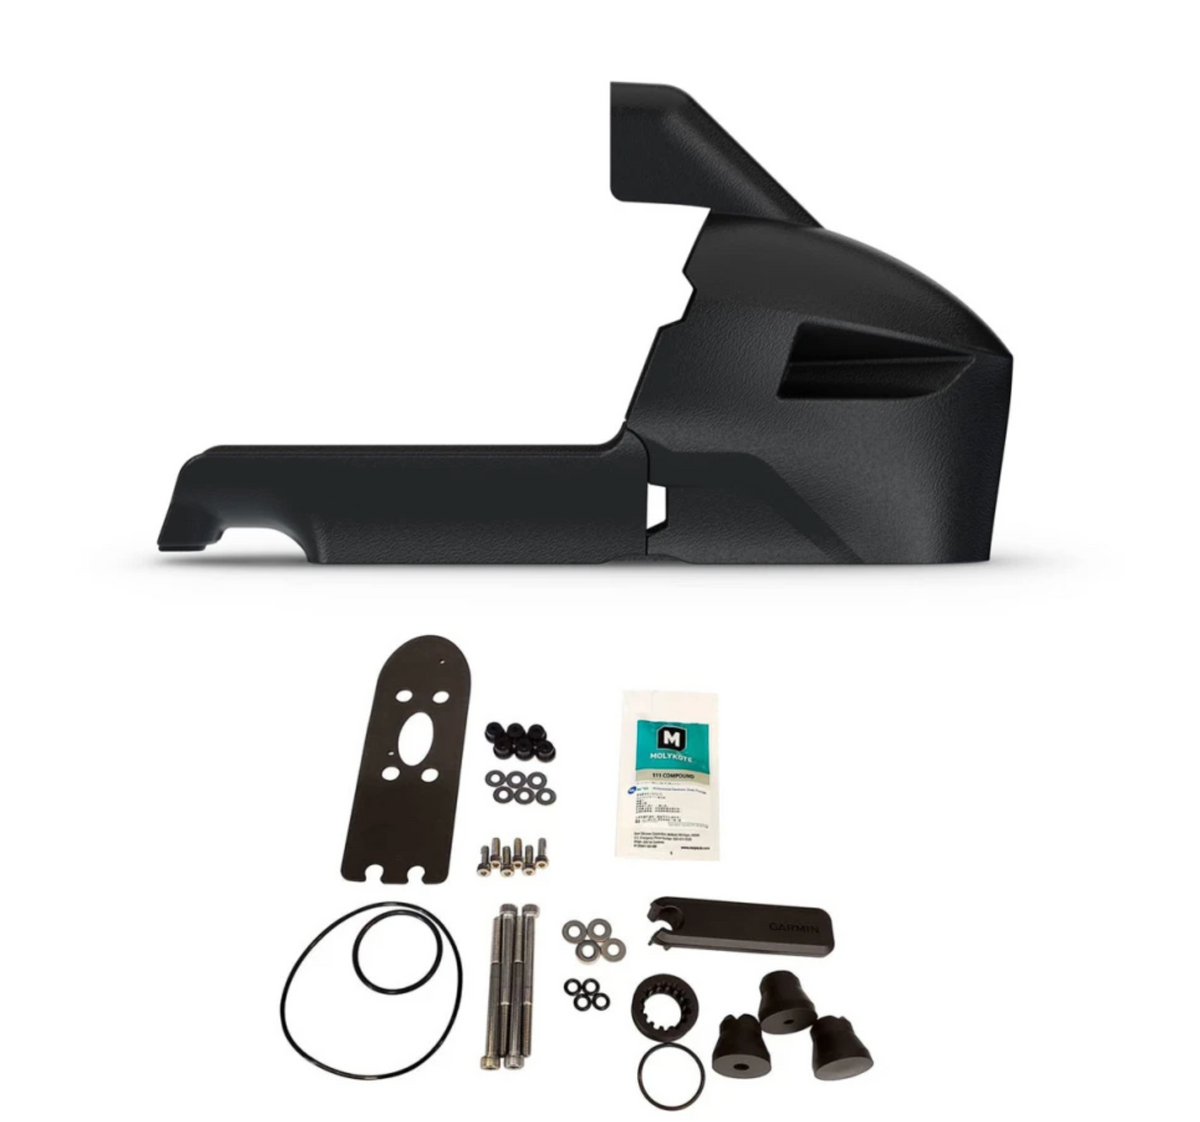 Garmin nose Cone With GT56 Transducer mount